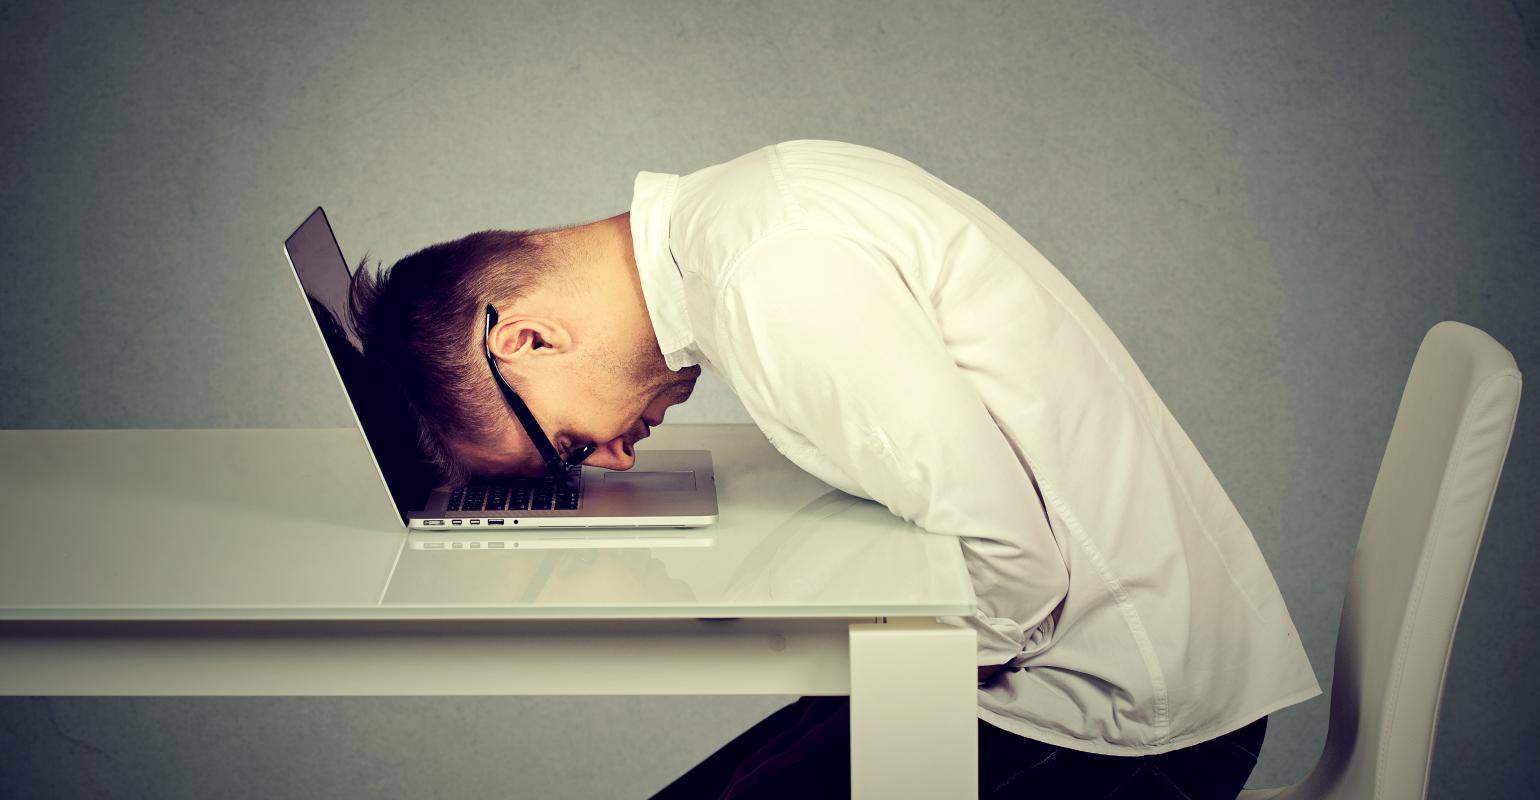 Video call fatigue - Tips for reducing burnout